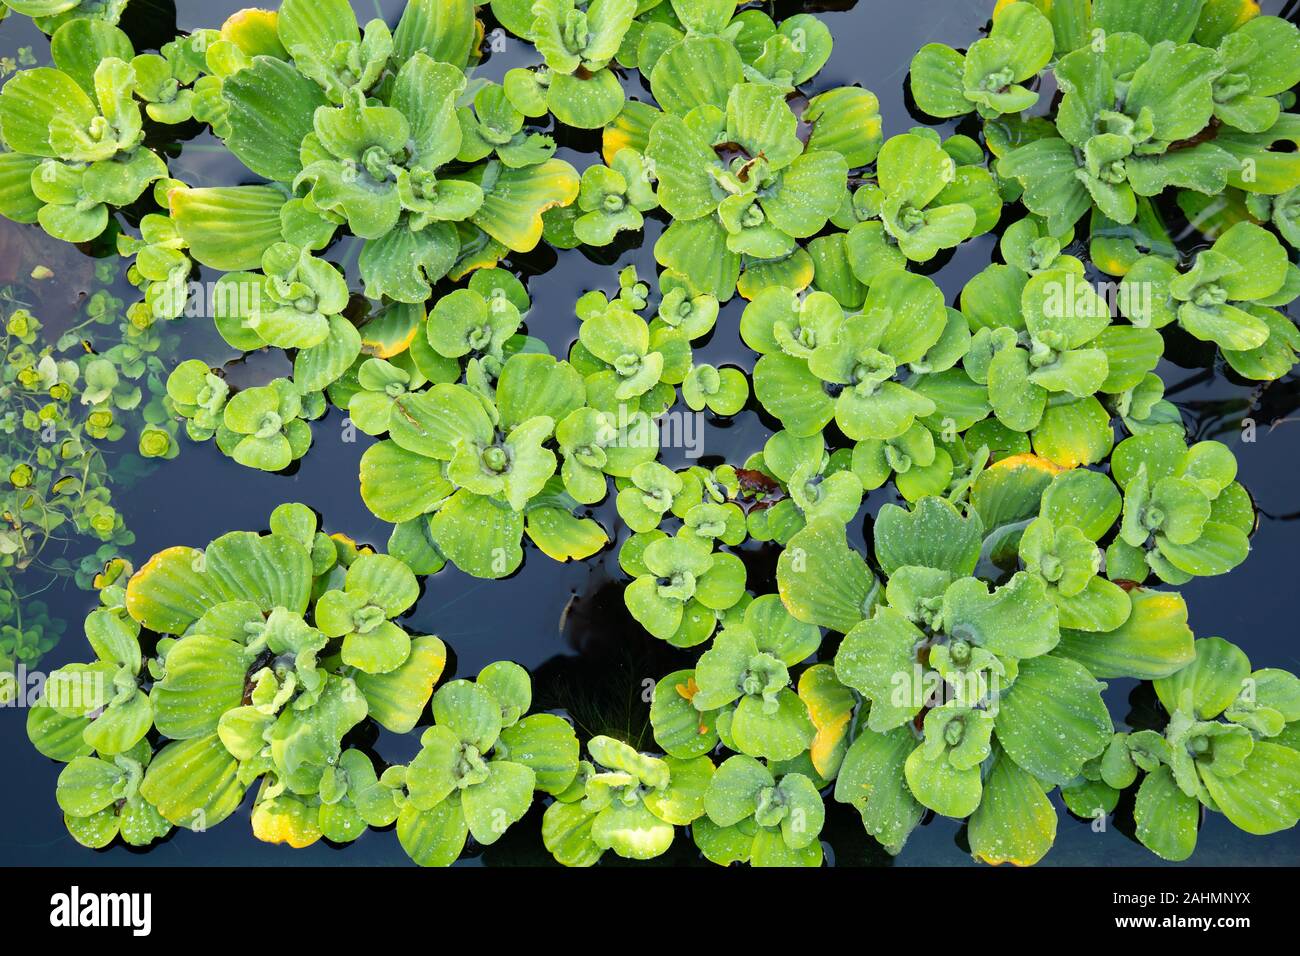 Aquatic plant called water lettuce or water cabbage Pistia ...